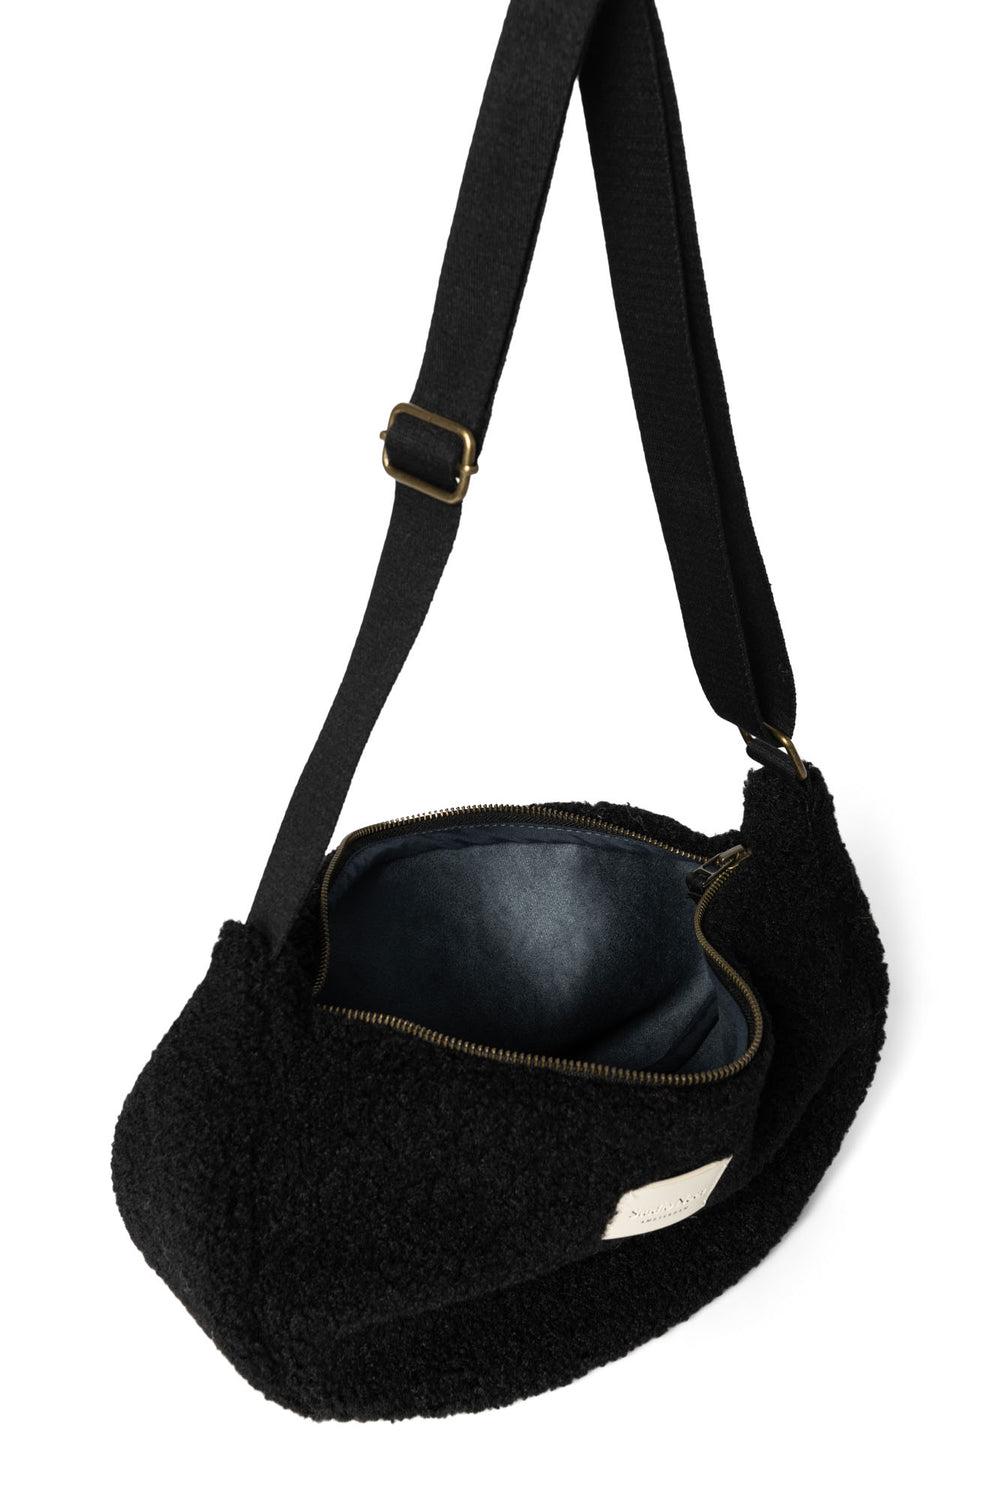 Teddy Adult Fanny Pack | Black - Tasche